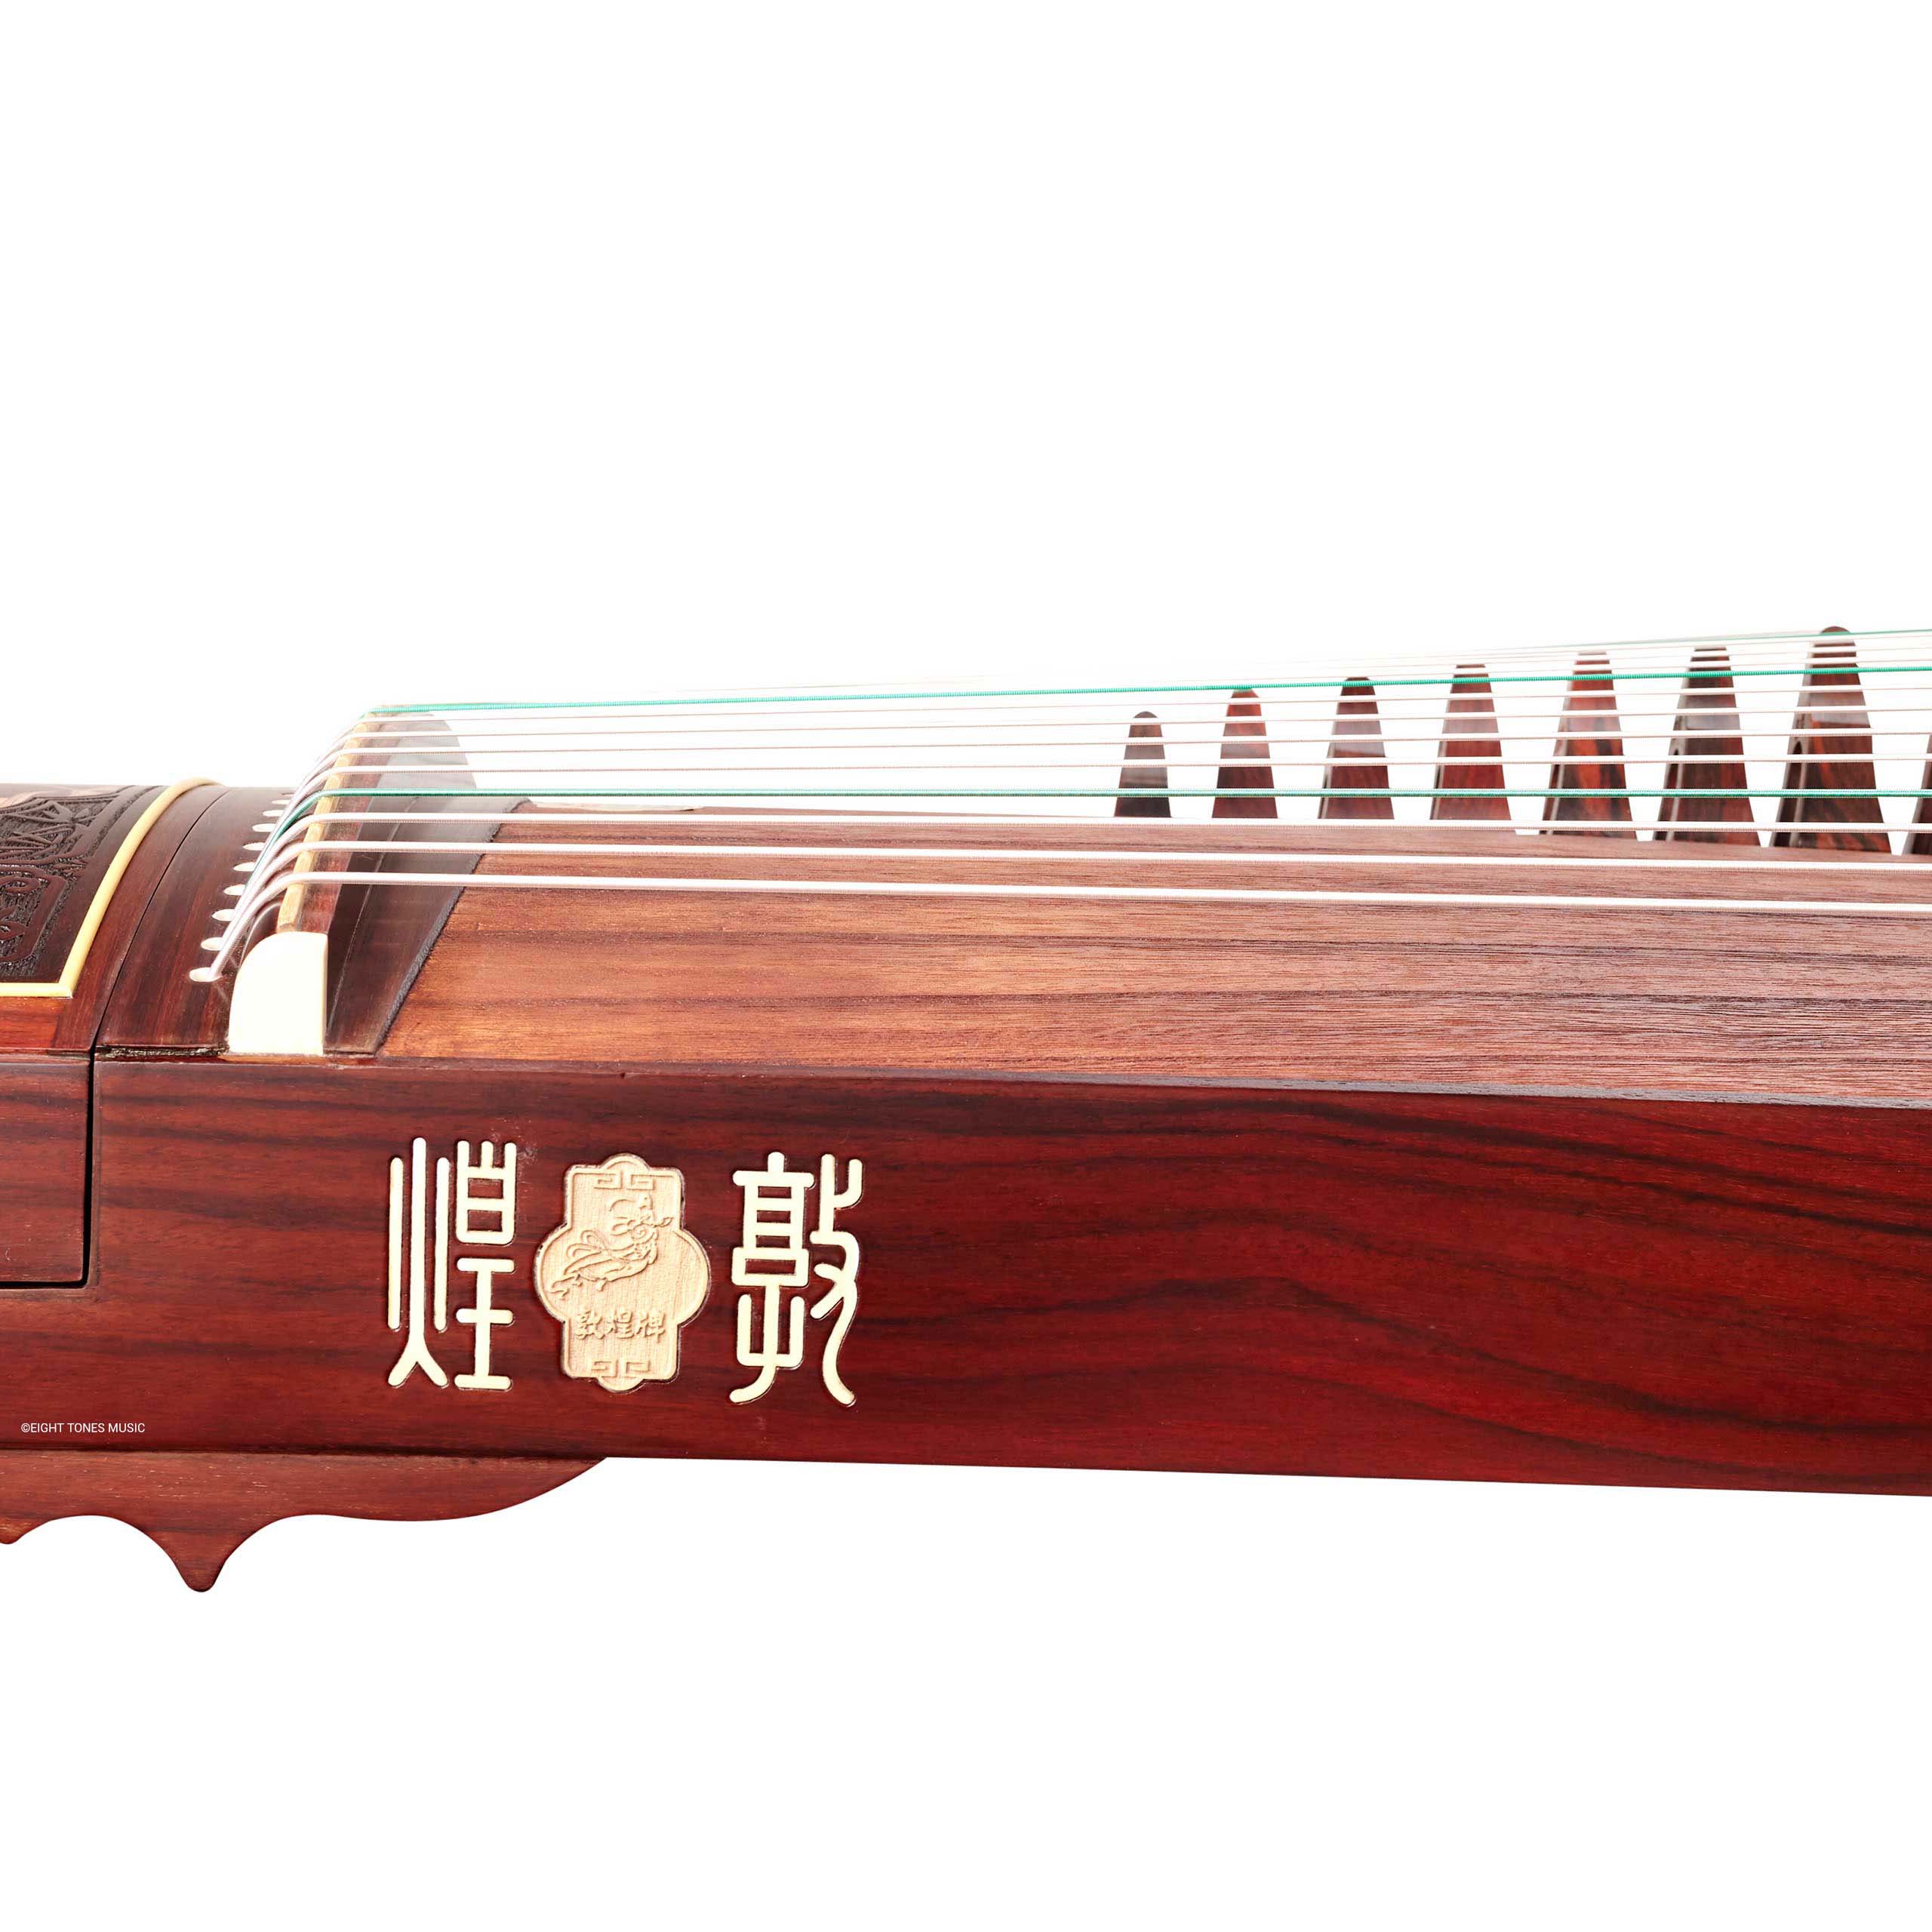 Dunhuang Yichang ‘Dreams of the Red Chamber’ Yellow Sandalwood Guzheng Sideboard with brand